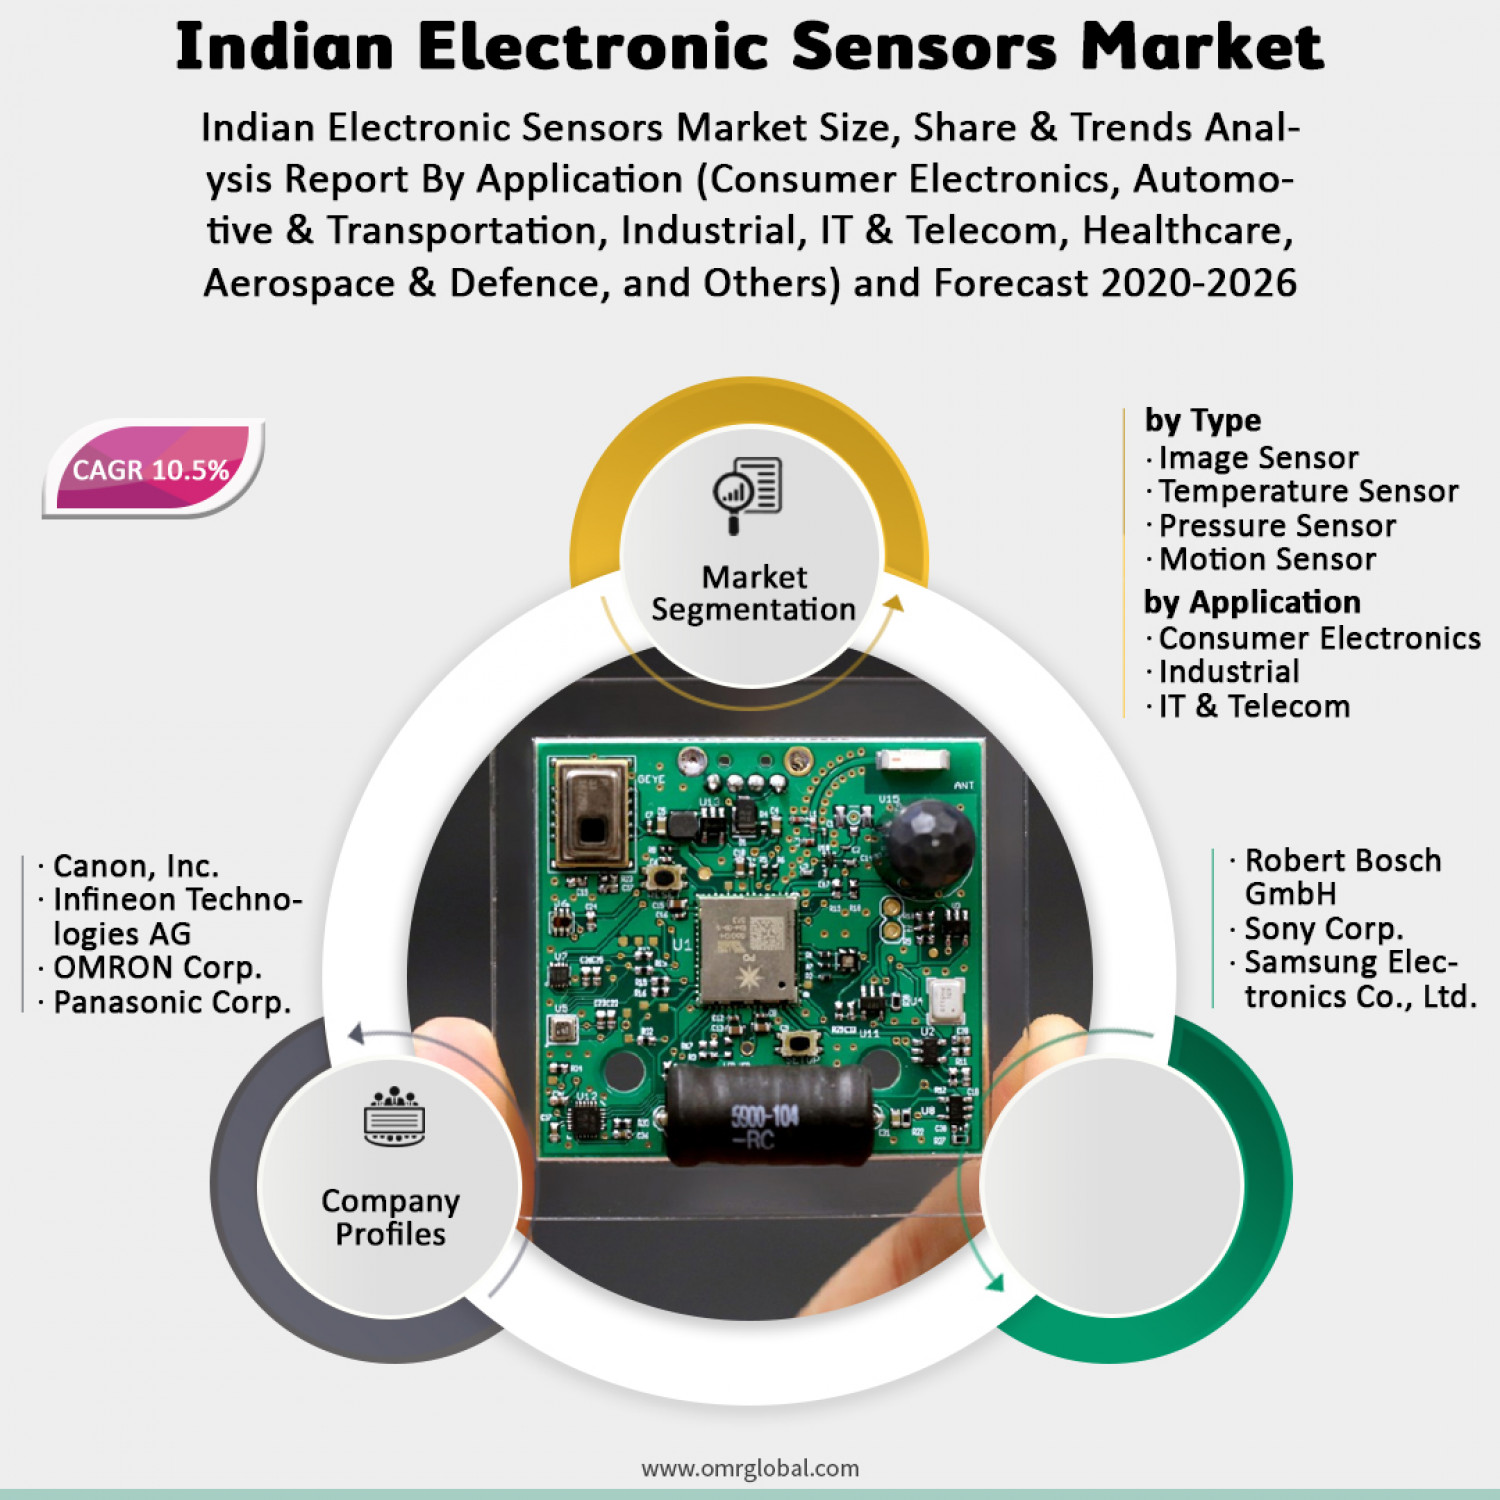 Indian Electronic Sensors Market Share, Trends, Size, Research and Forecast 2020-2026 Infographic